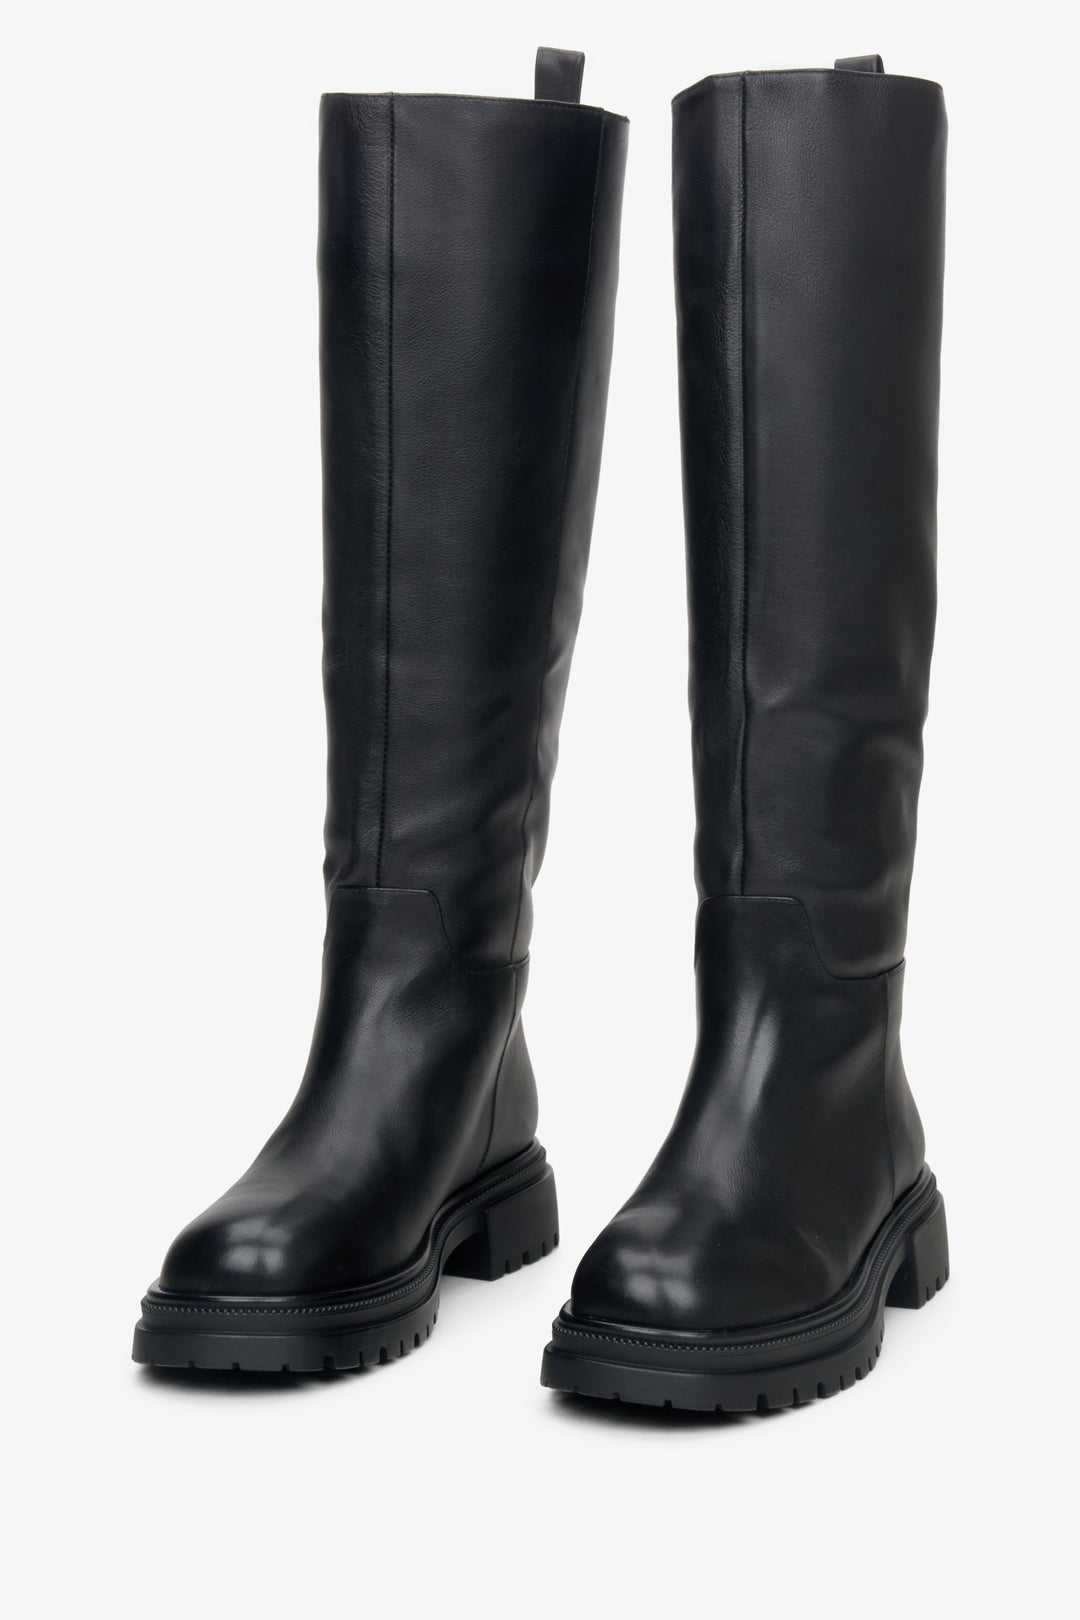 Women's black leather high boots with elastic shaft by Estro.